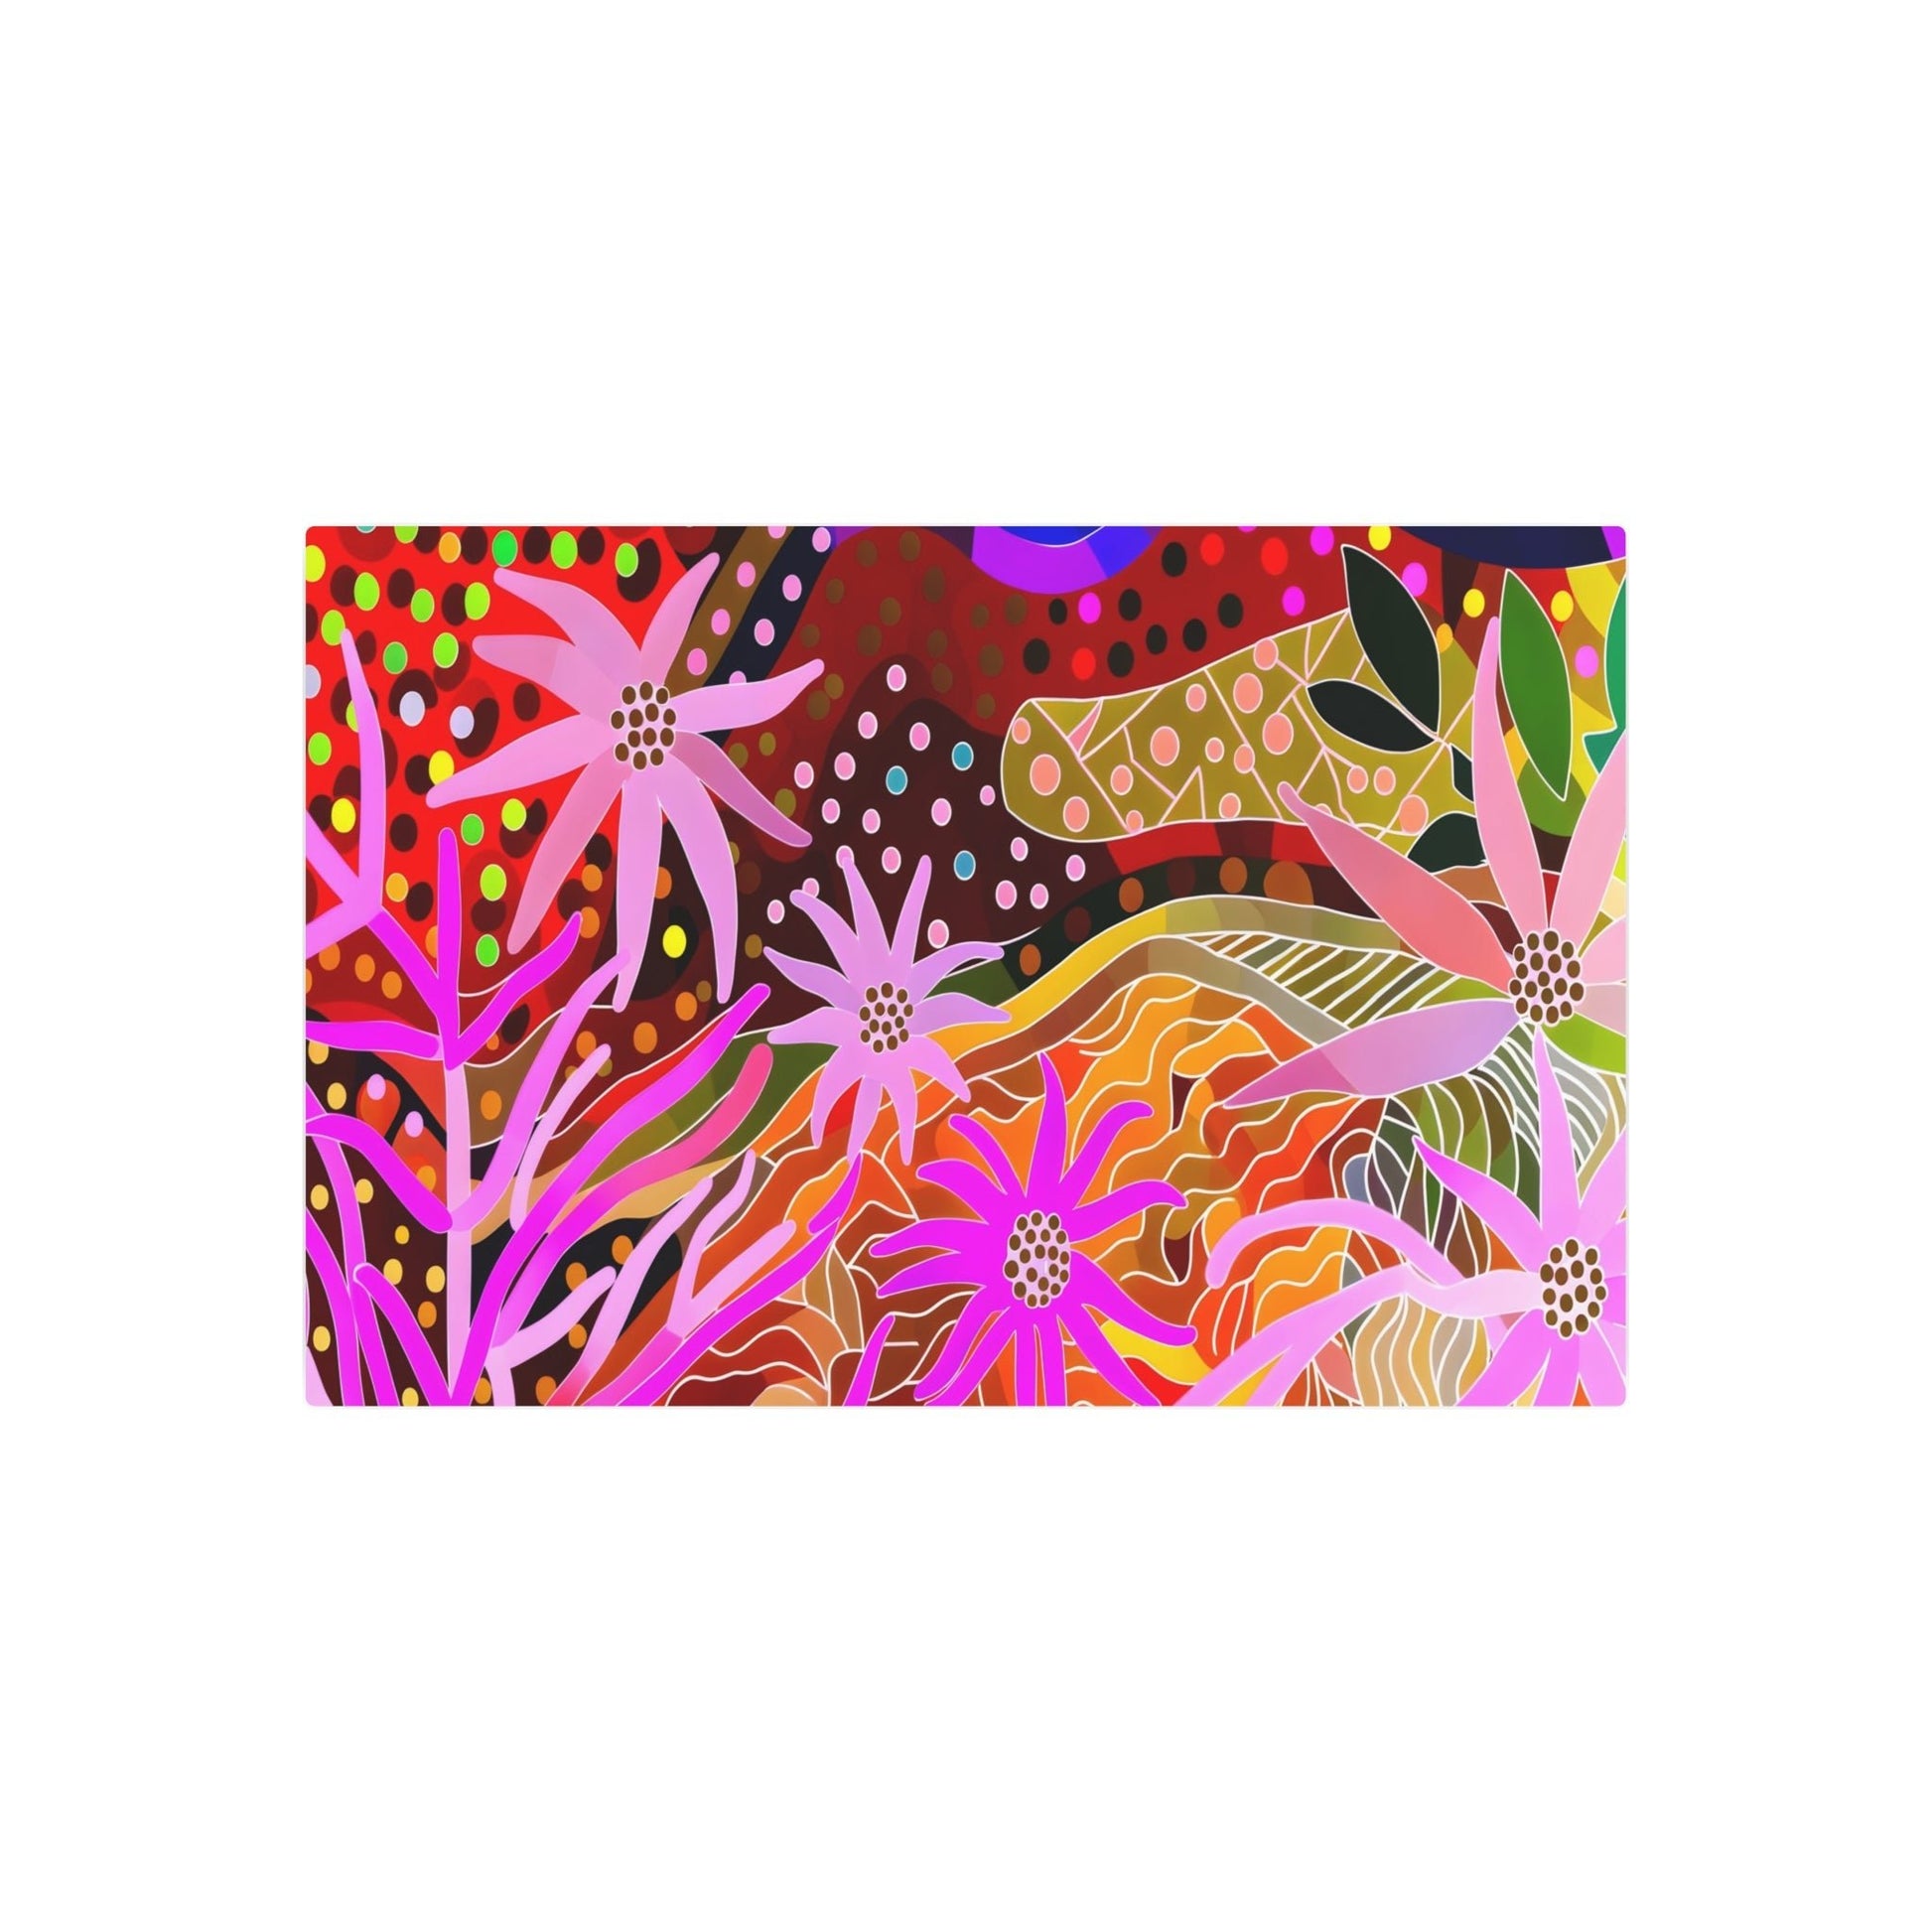 Metal Poster Art | "Vibrant Australian Aboriginal Art - Dreamtime Scene with Wildflowers, Geometric Shapes, Curved Forms in Bold Colors - Non-Western Global - Metal Poster Art 36″ x 24″ (Horizontal) 0.12''